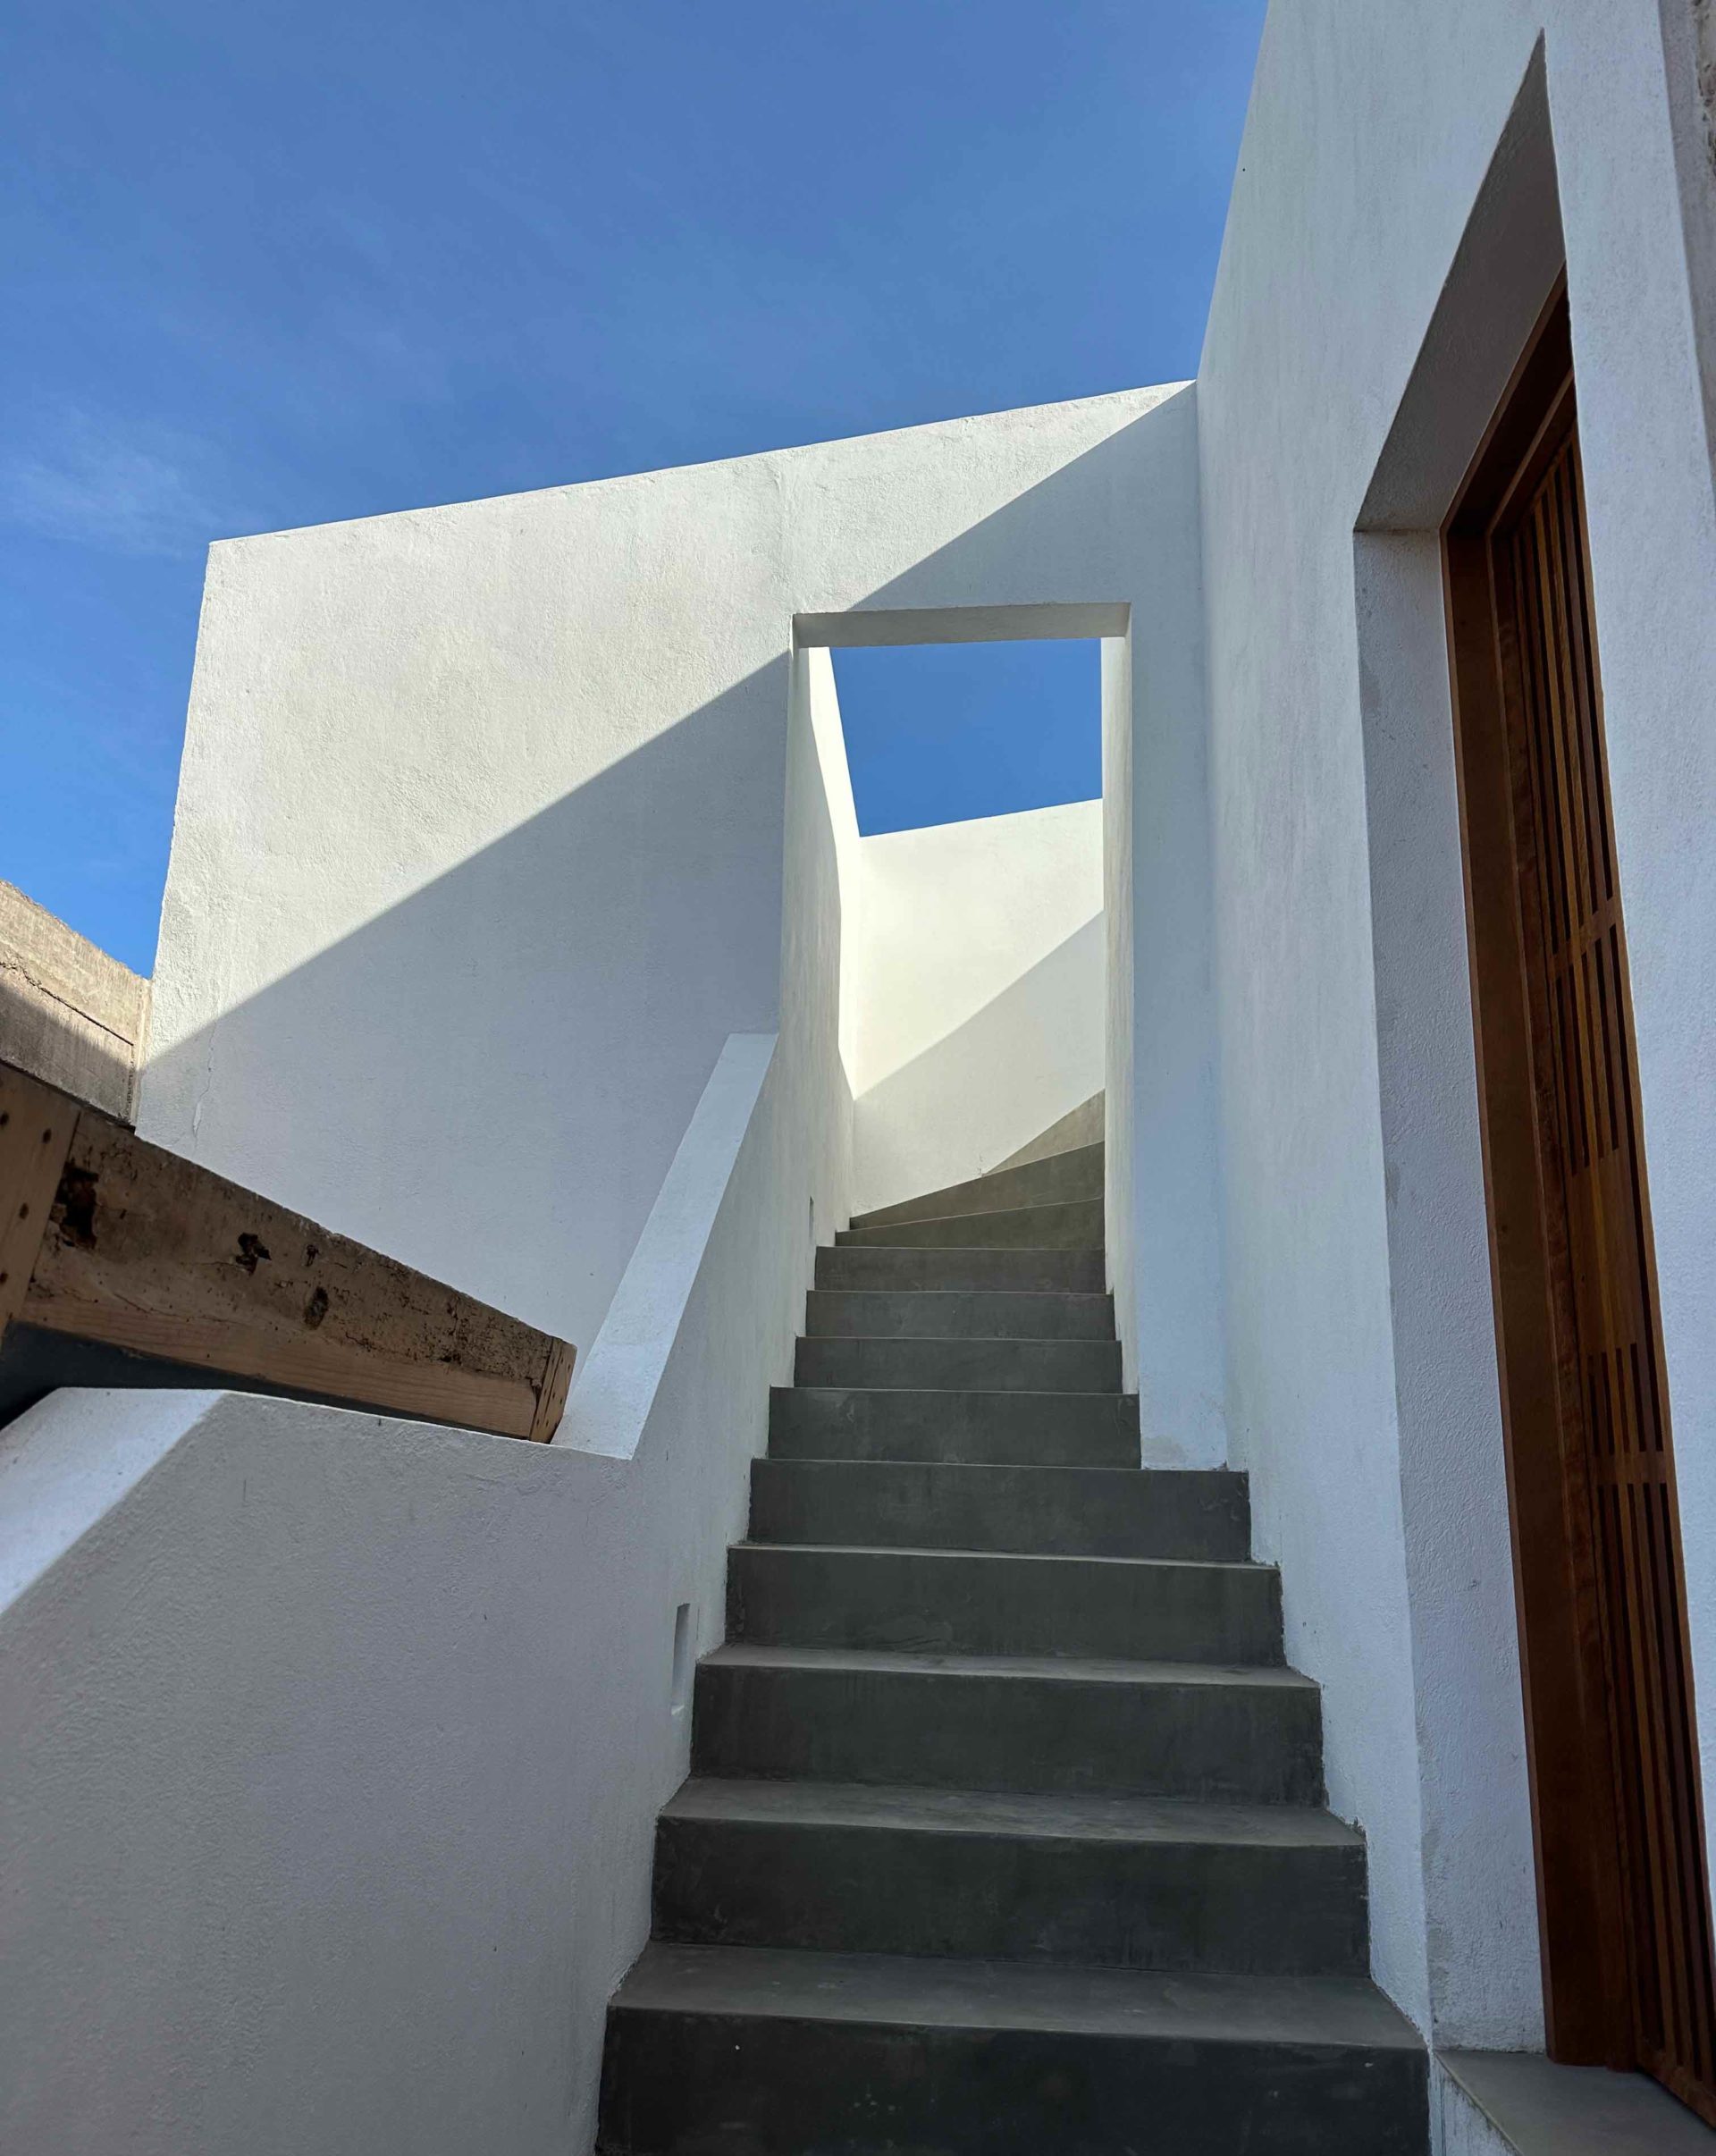 The guesthouse is located in the historic center of Todos Santos